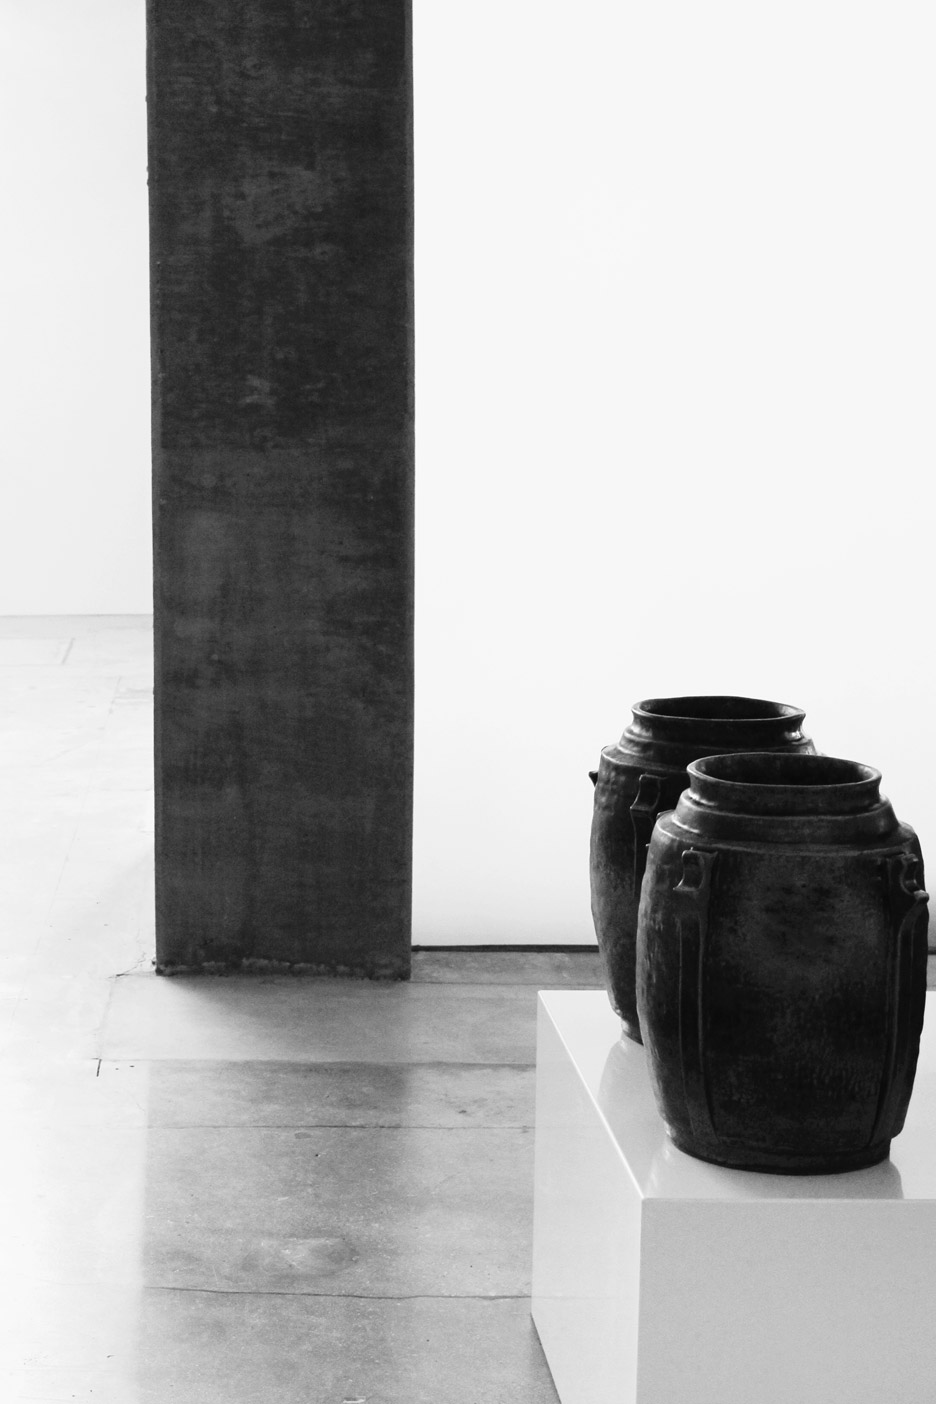 Rick Owens' first store in Los Angeles, USA